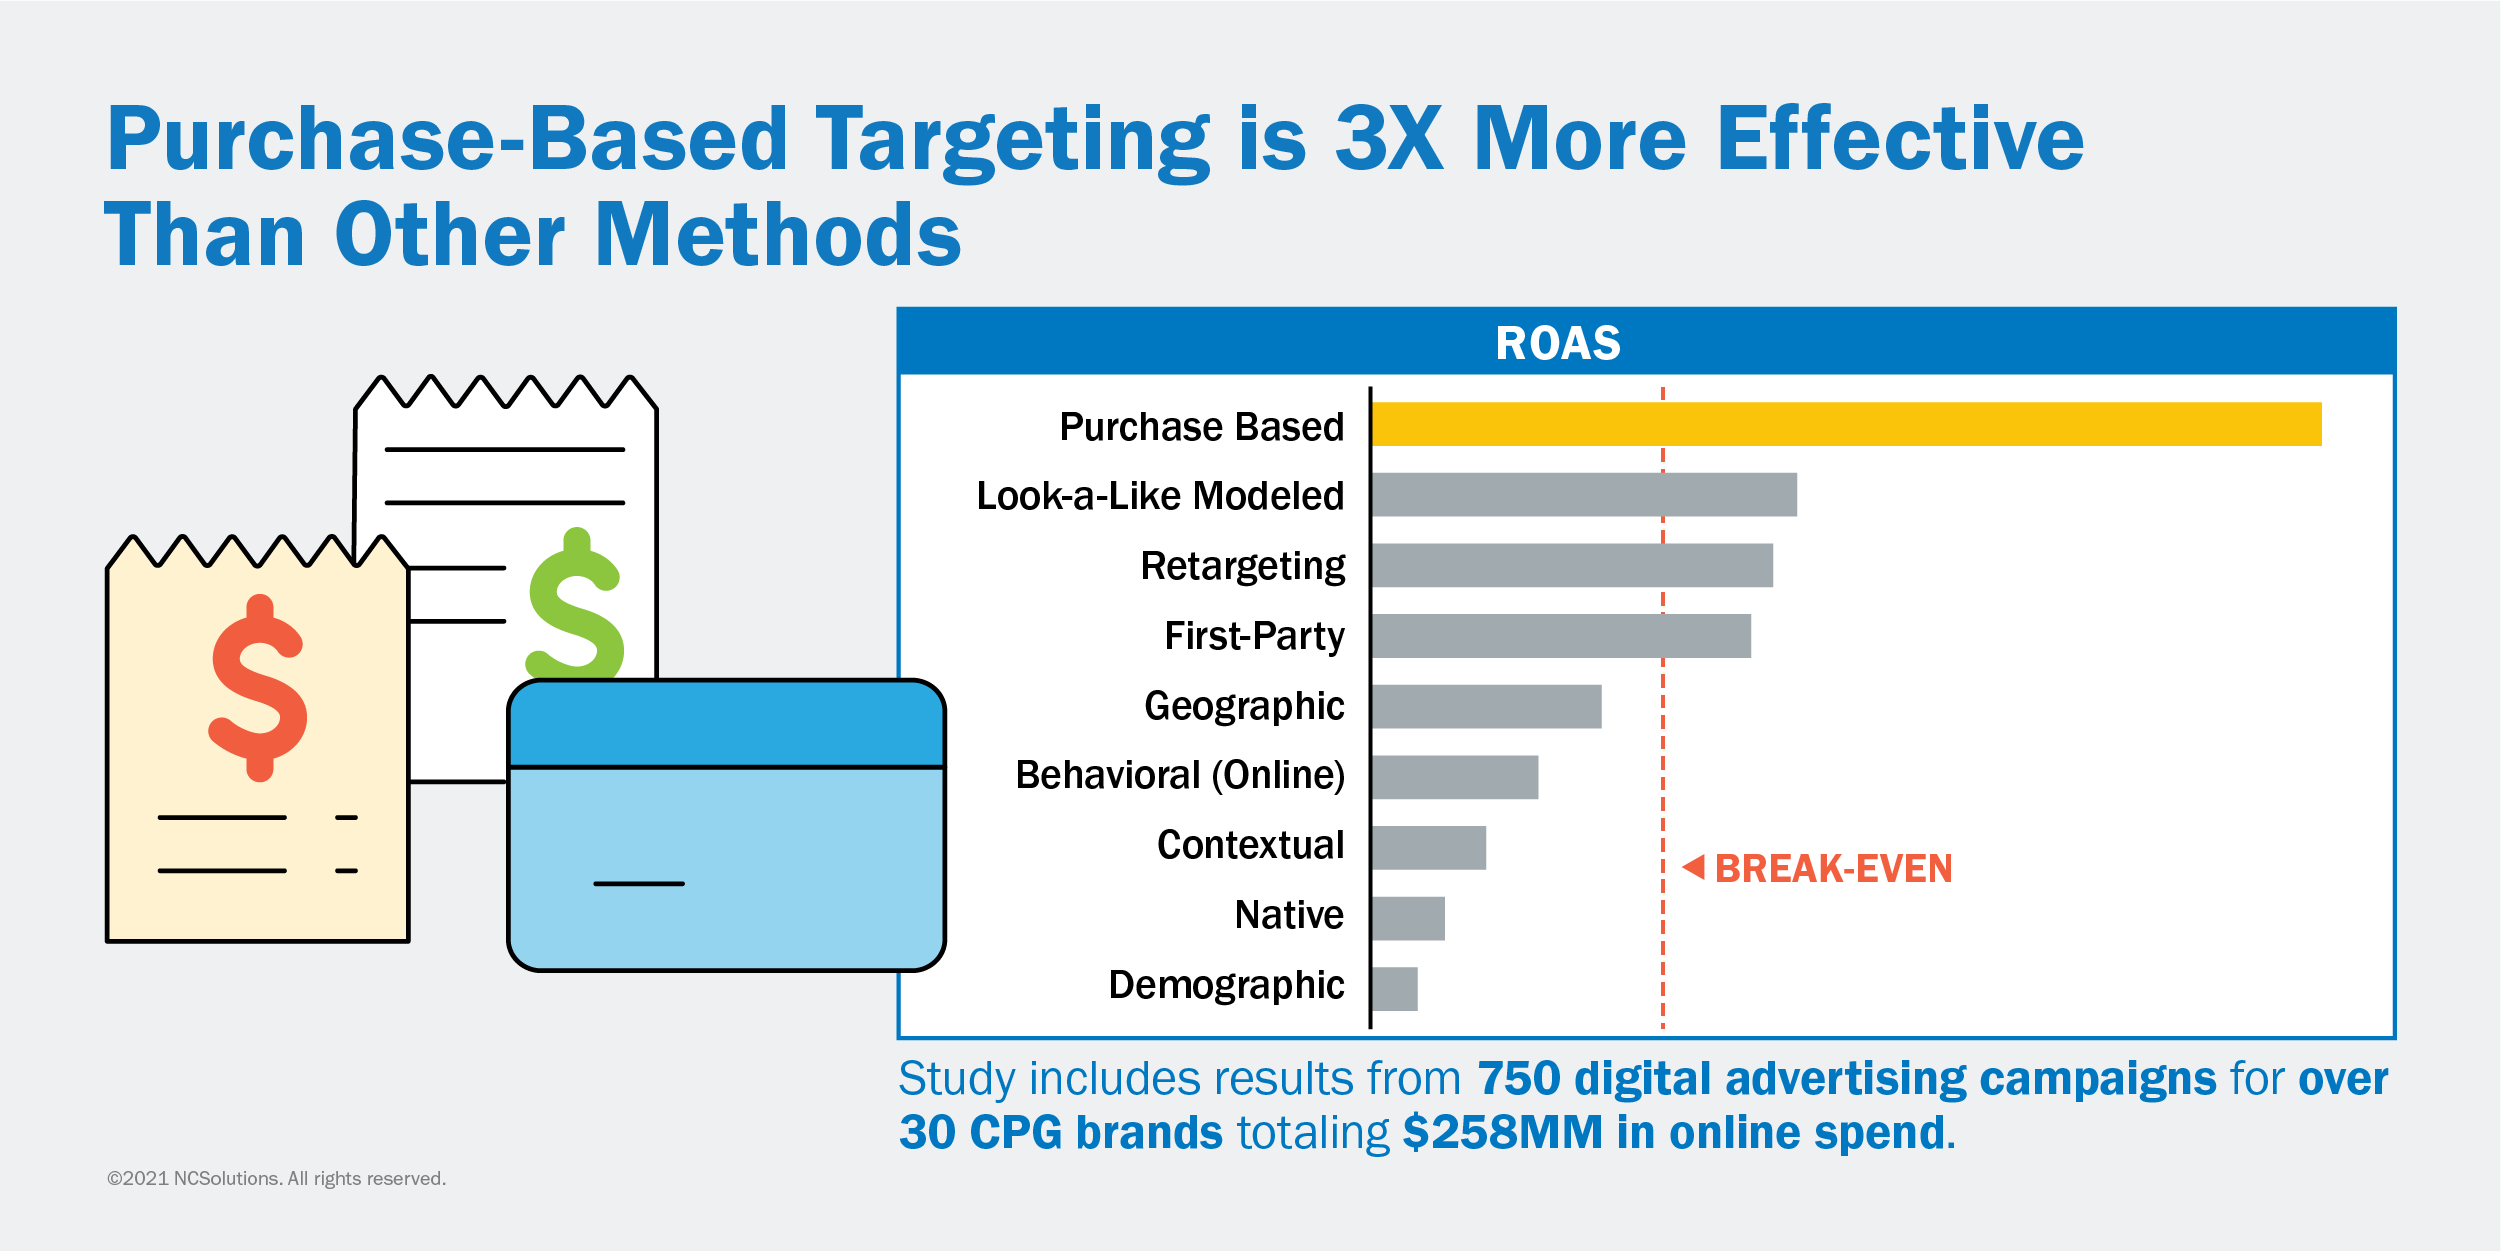 Purchase-Based Targeting is 3X more effective than other methods.